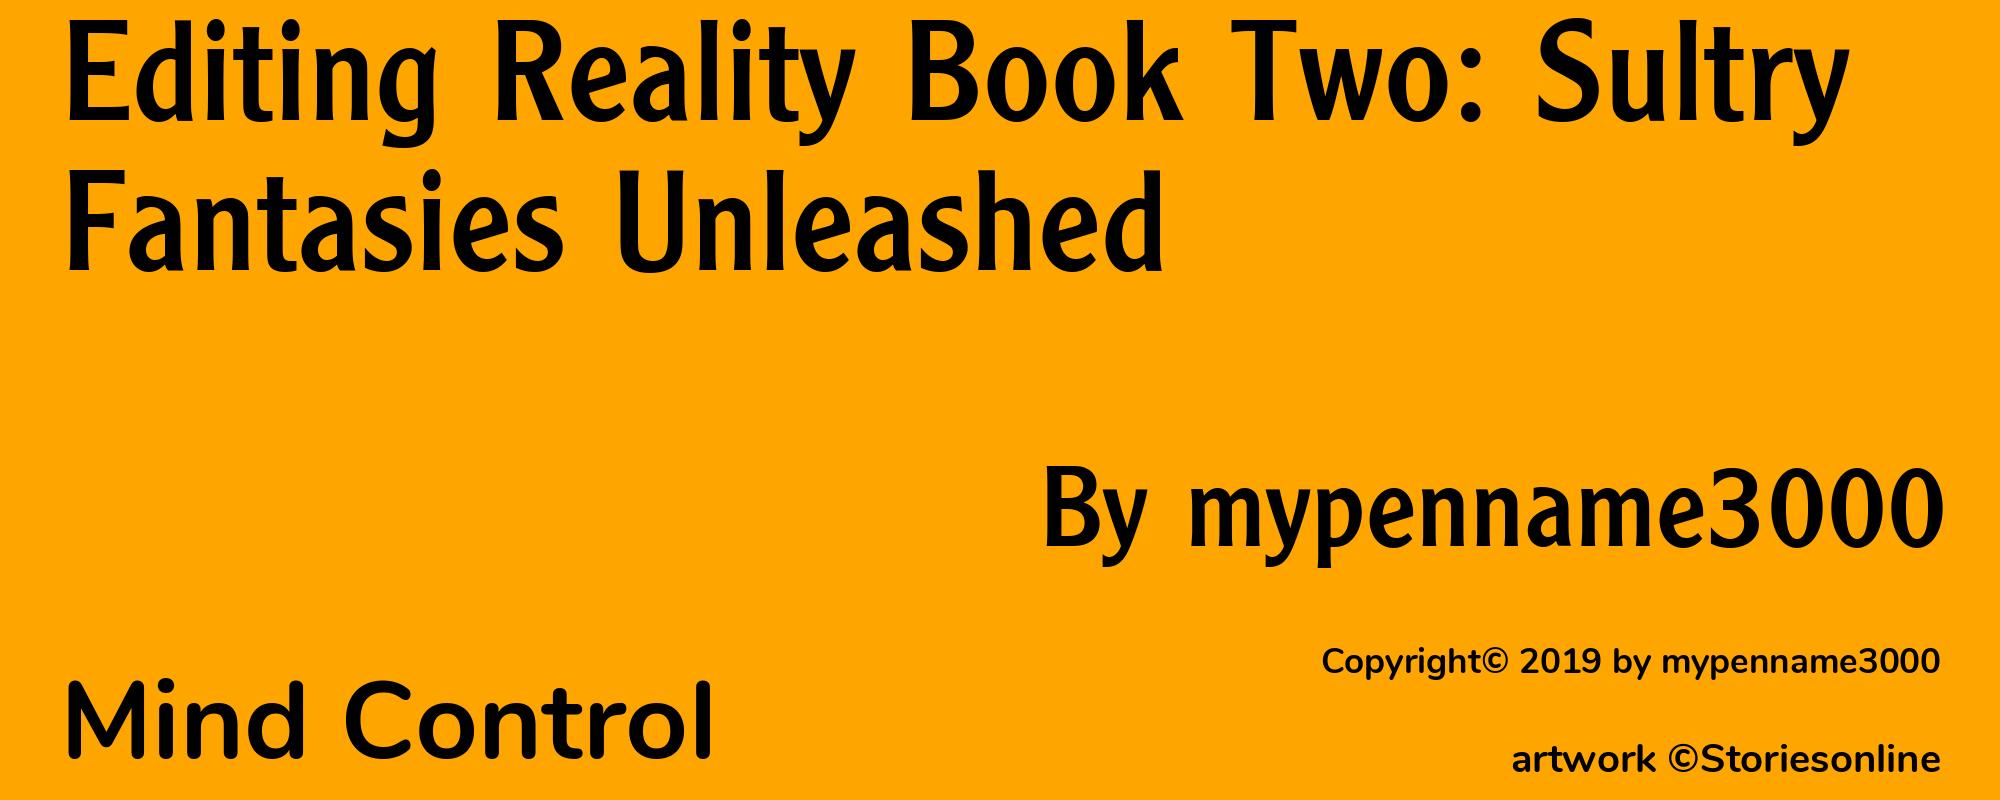 Editing Reality Book Two: Sultry Fantasies Unleashed - Cover